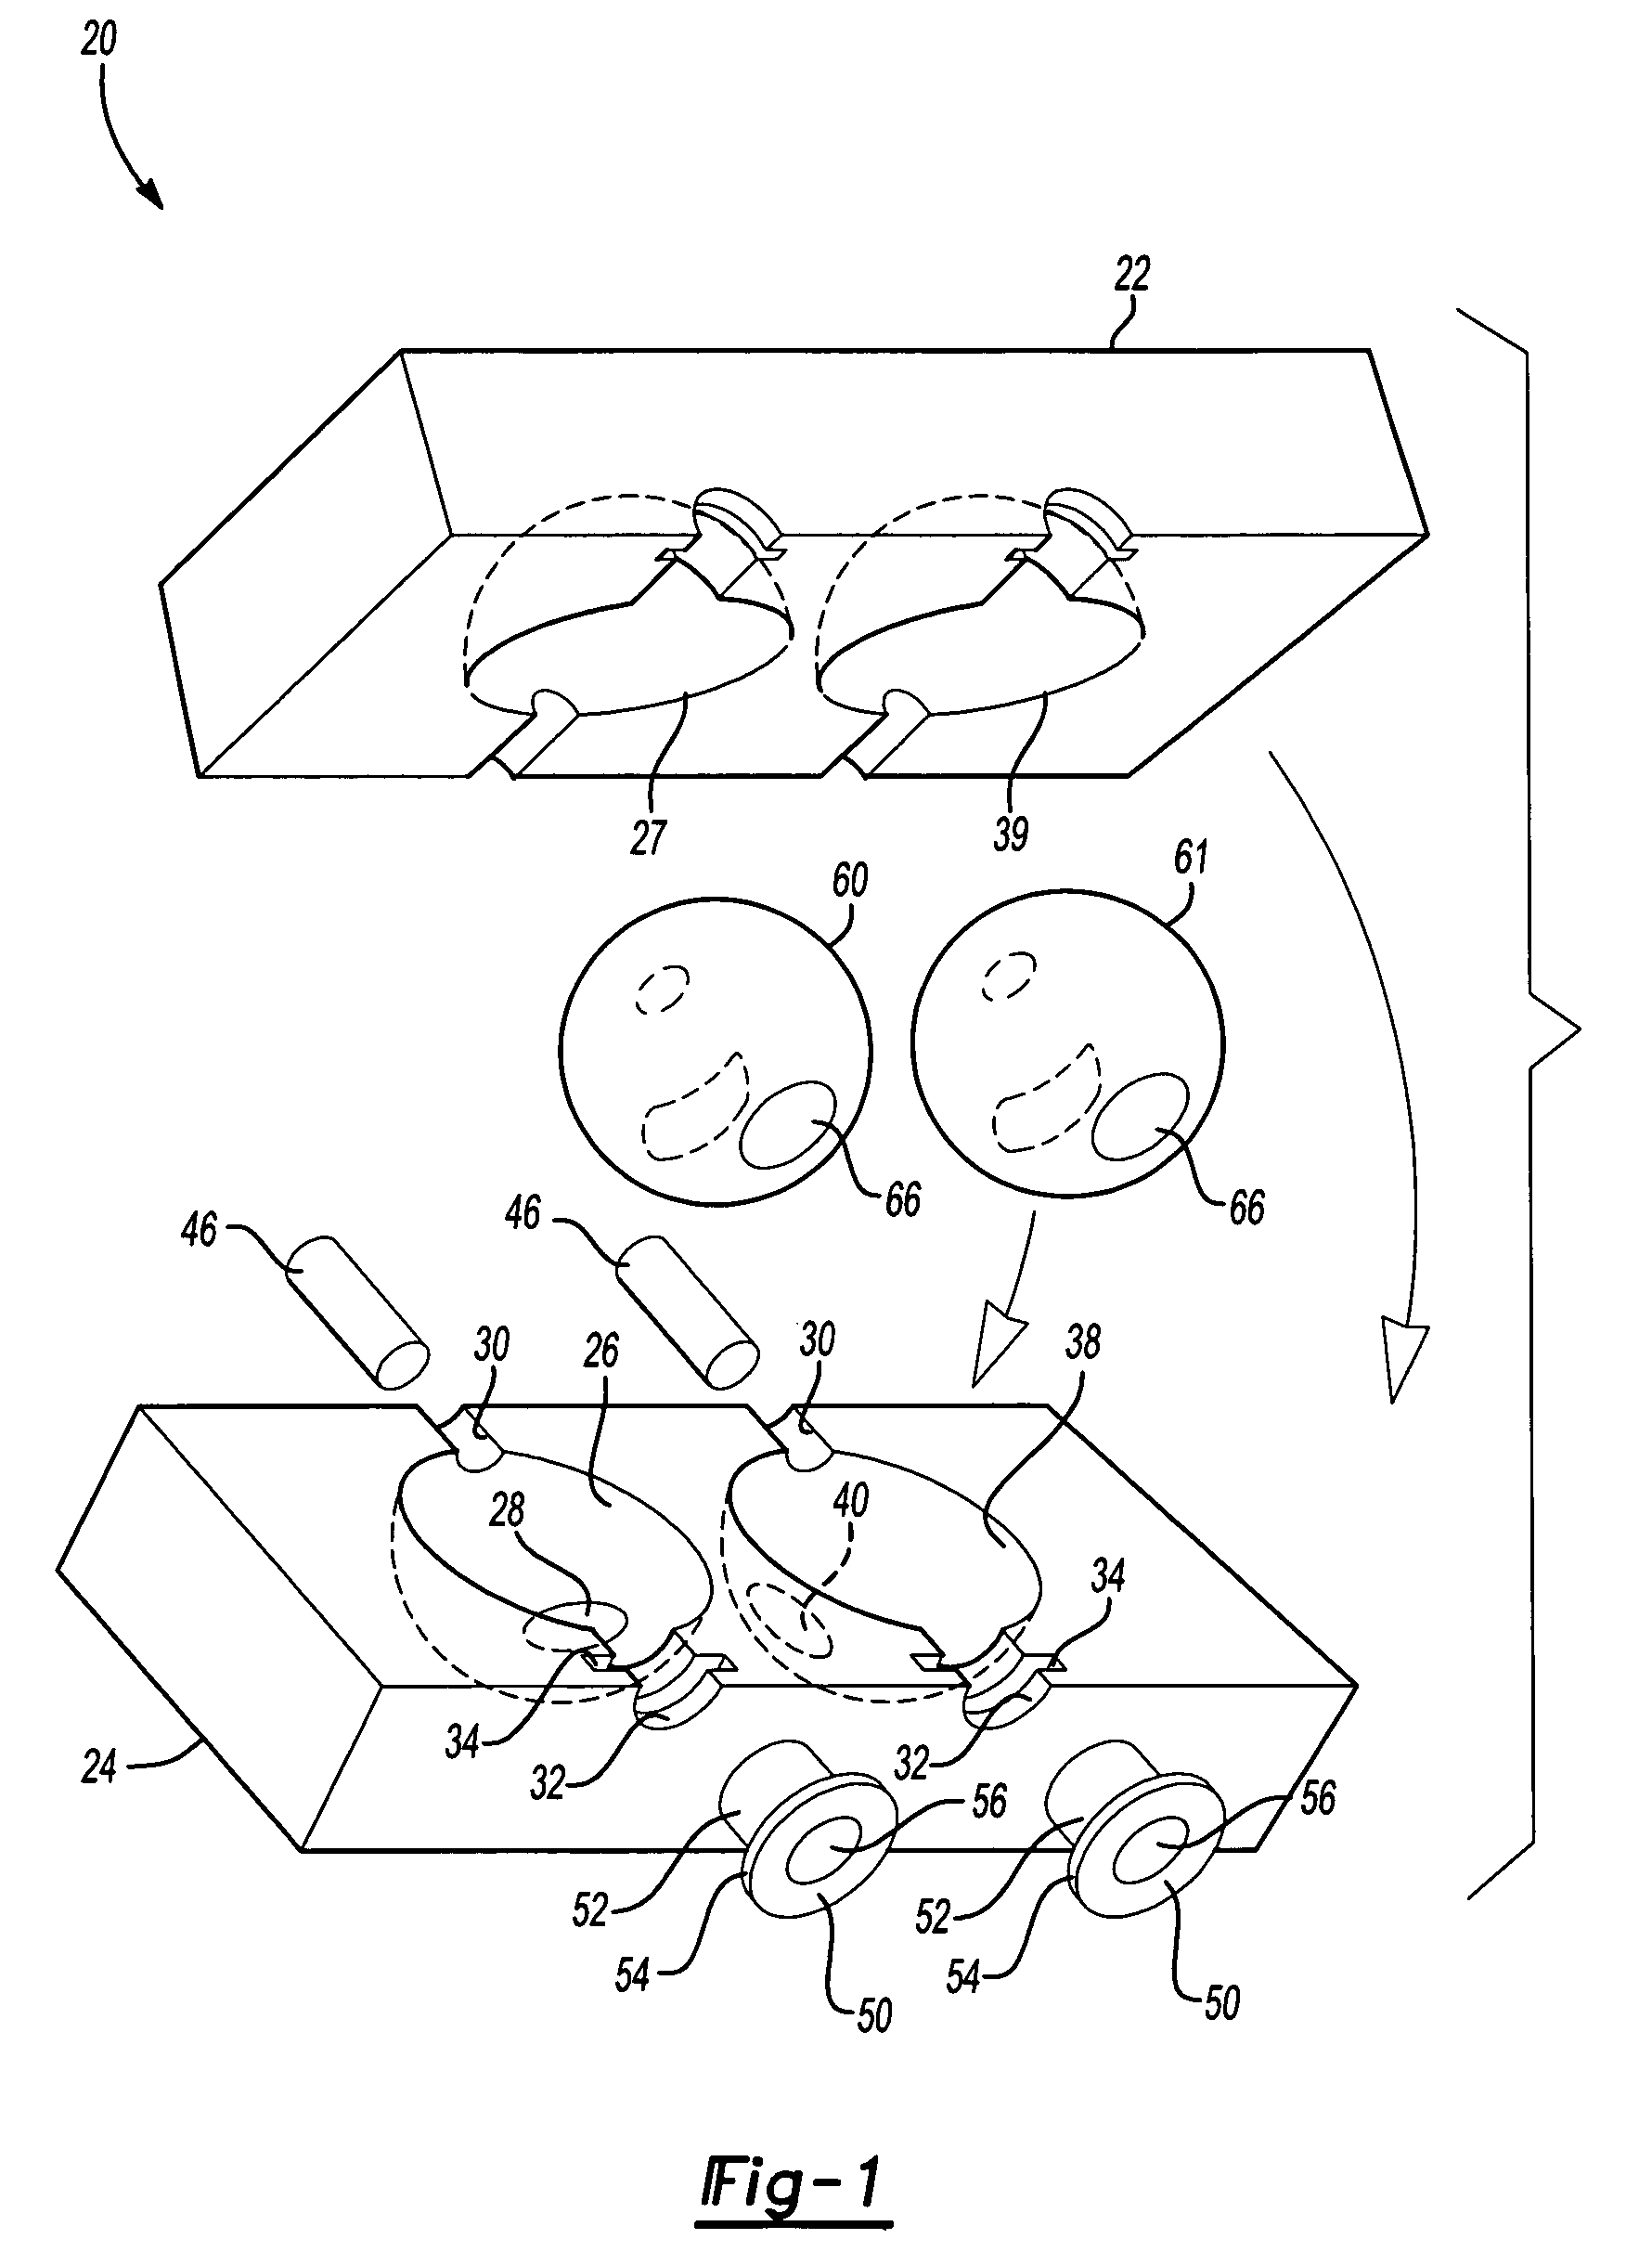 Cylinder head assembly and spherical valve for internal combustion engines